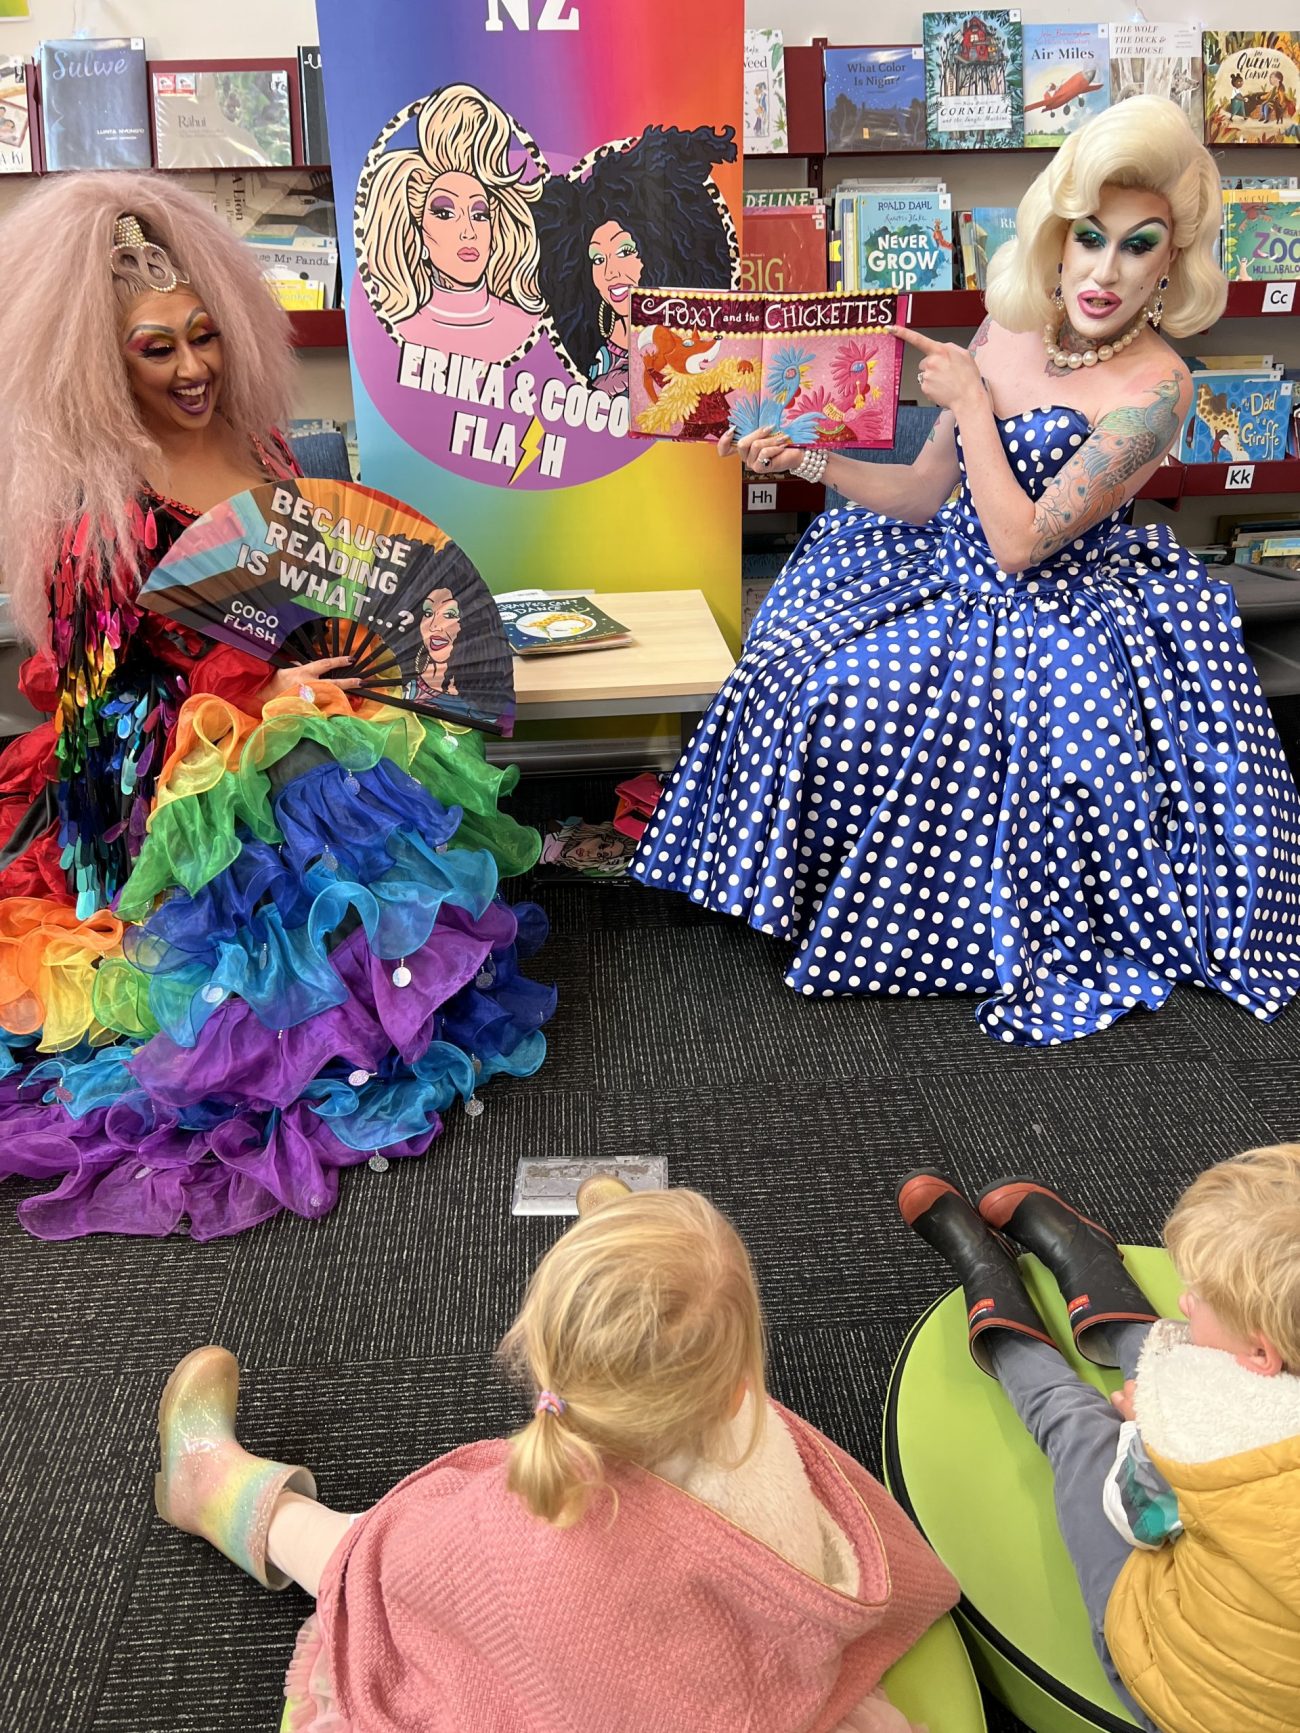 Pride week celebrated at the Library